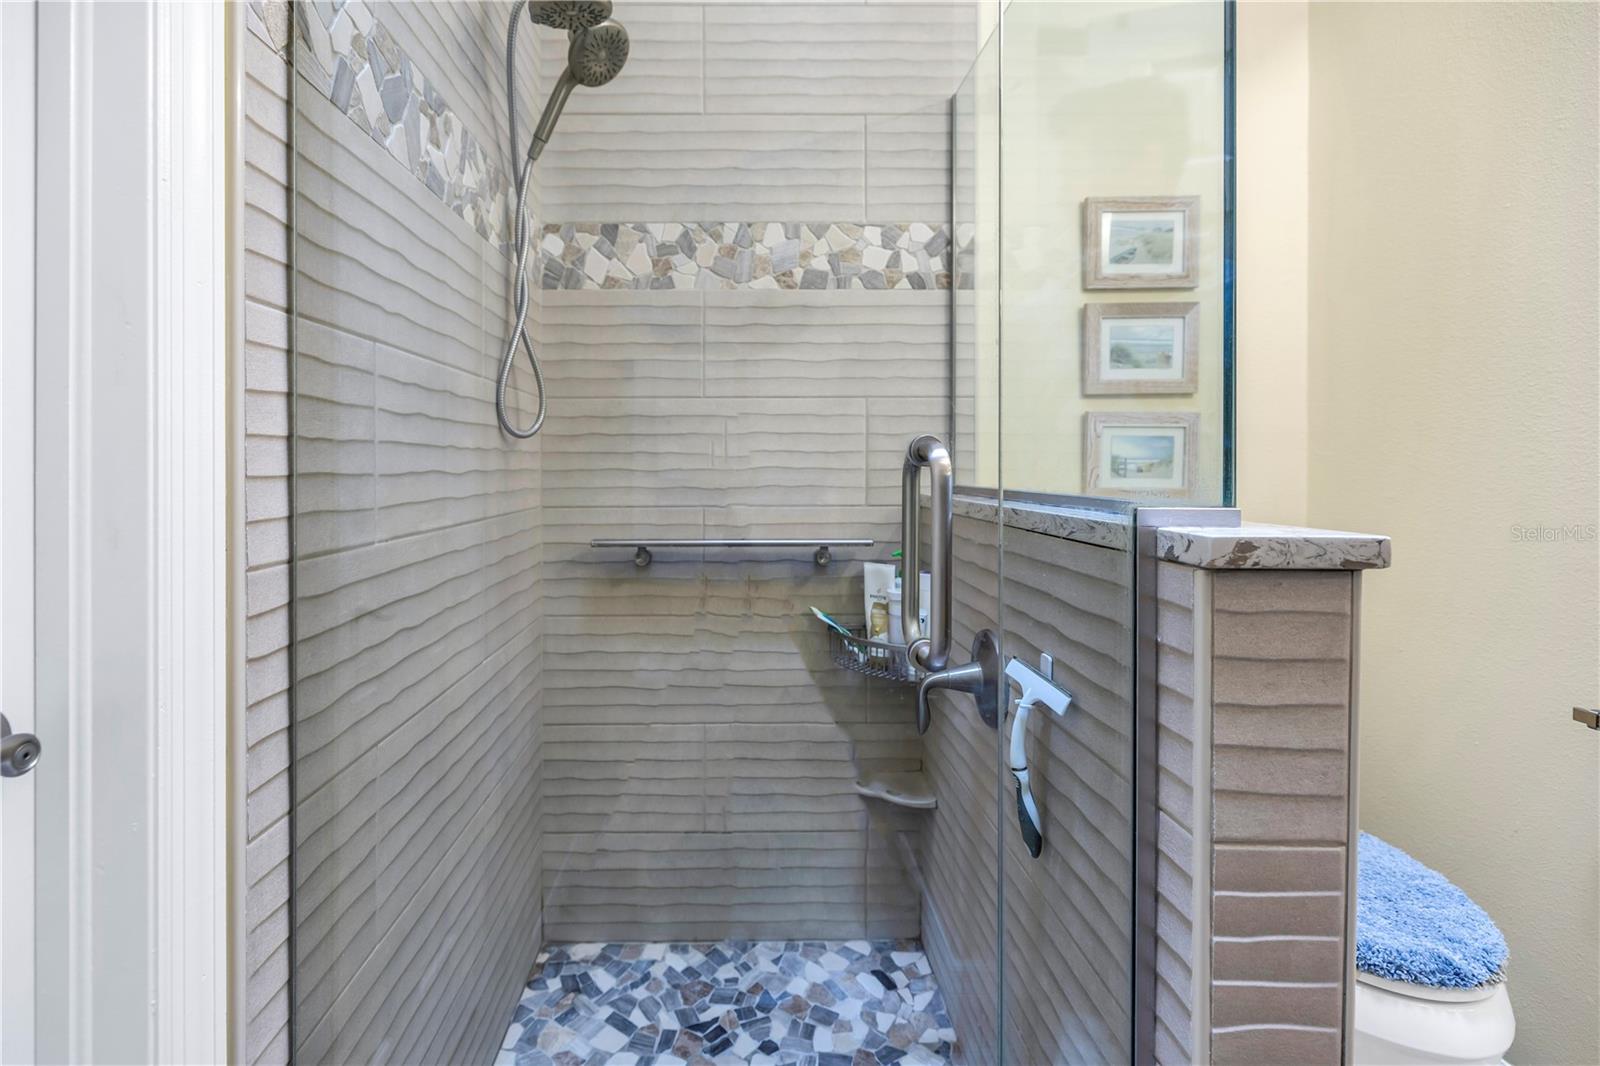 Primary shower updated with neutral tile